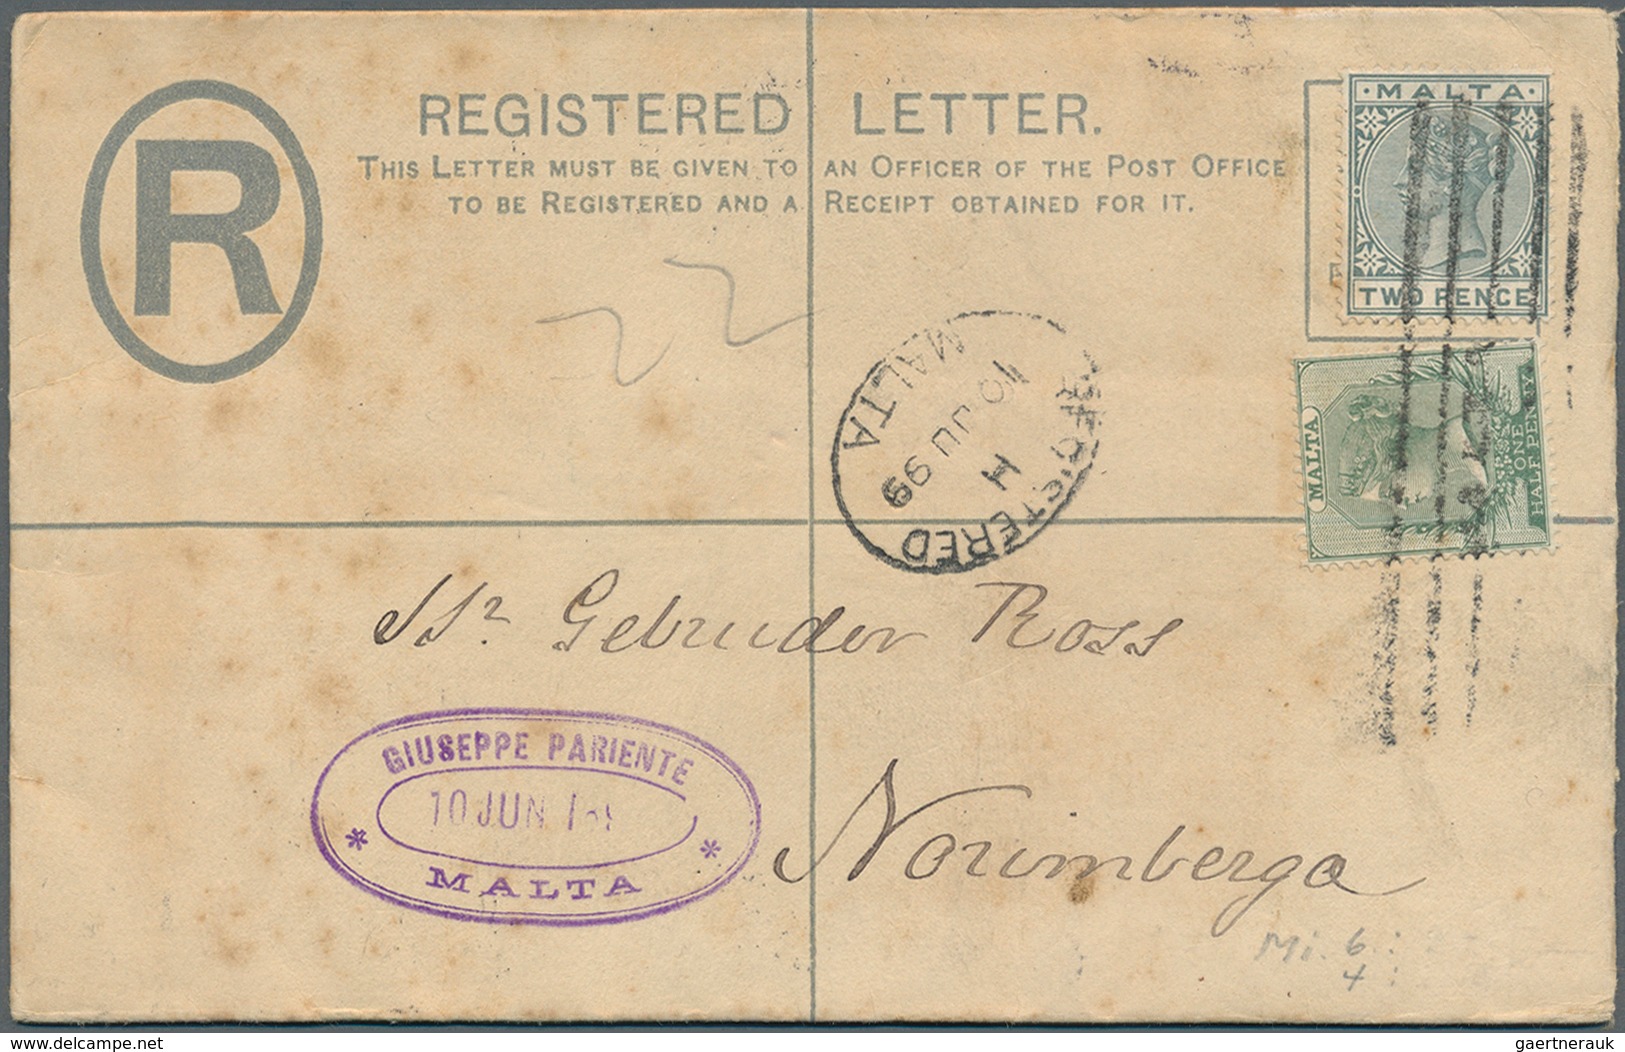 27292 Malta: 1845-1950 (ca.), collection of 170 mostly better items, shipmail, postage due, many registere